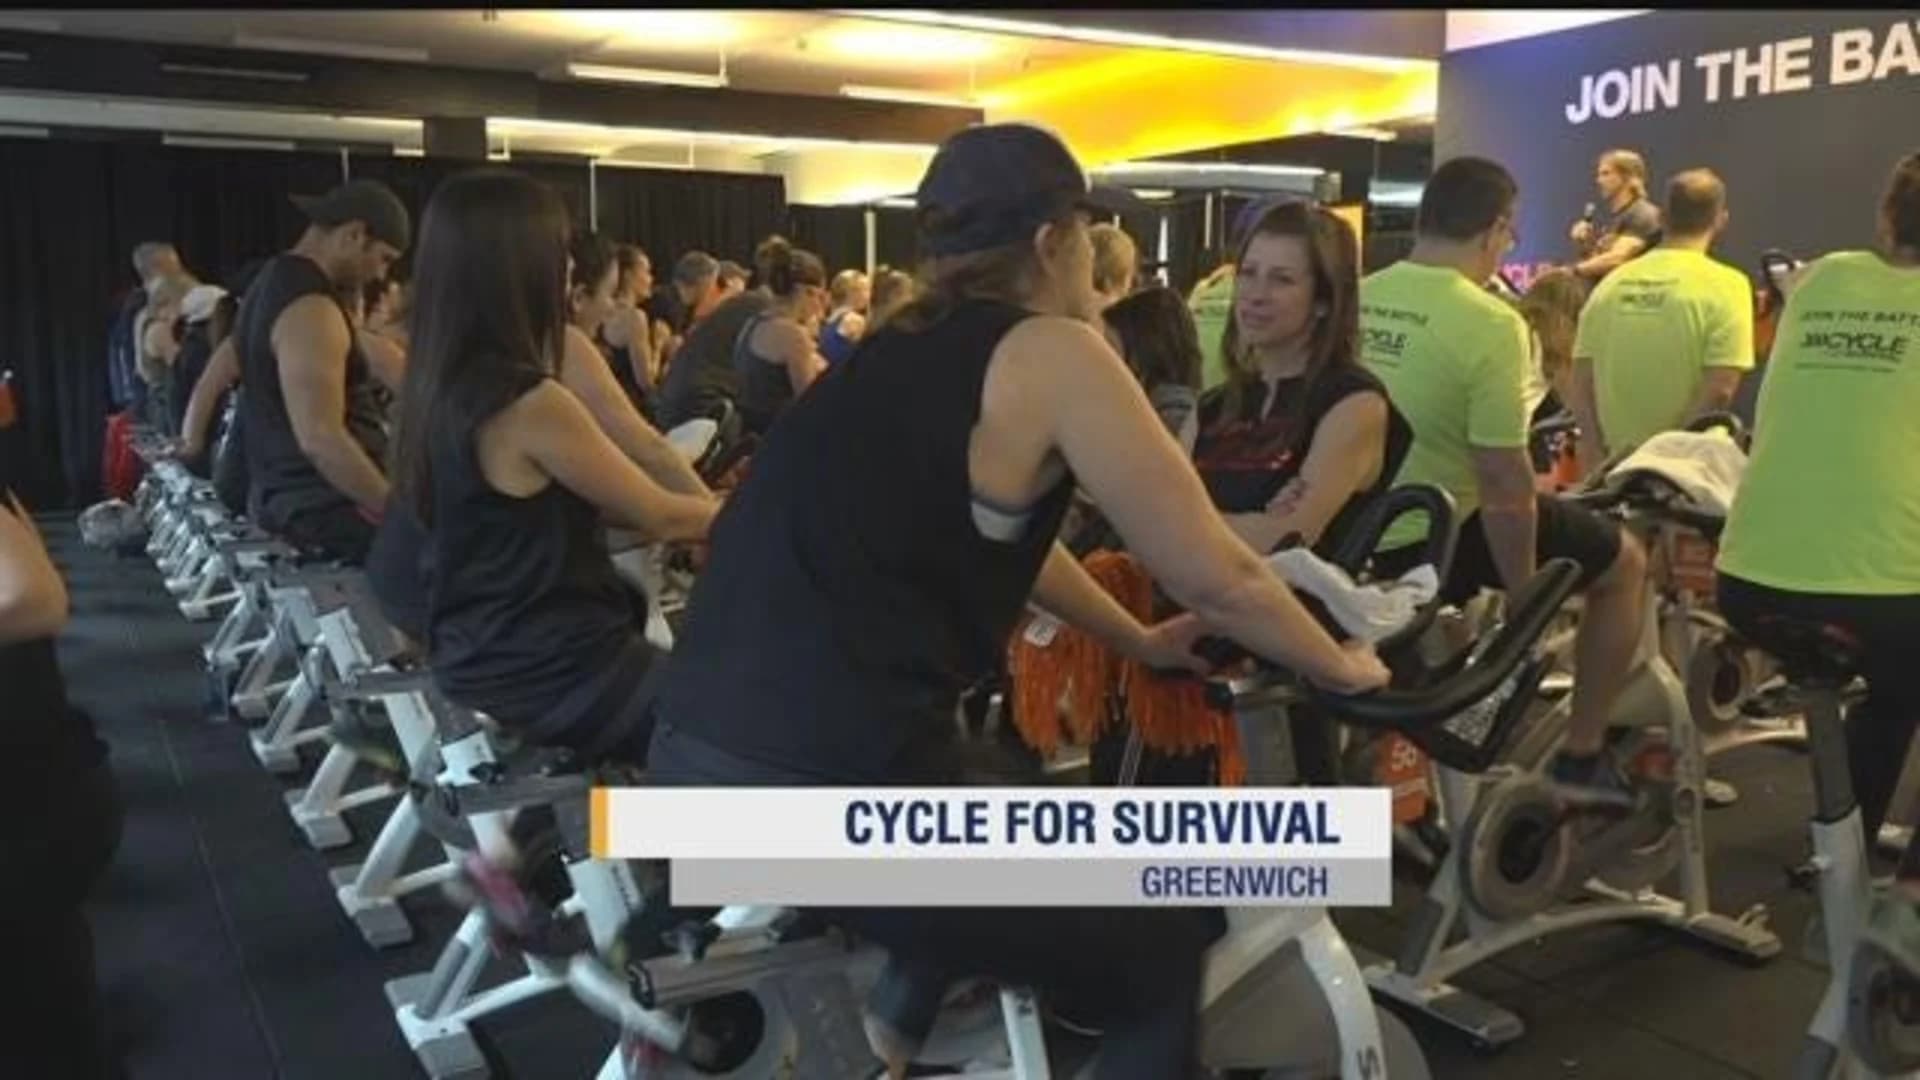 Over 1,000 participate in Cycle for Survival in Greenwich